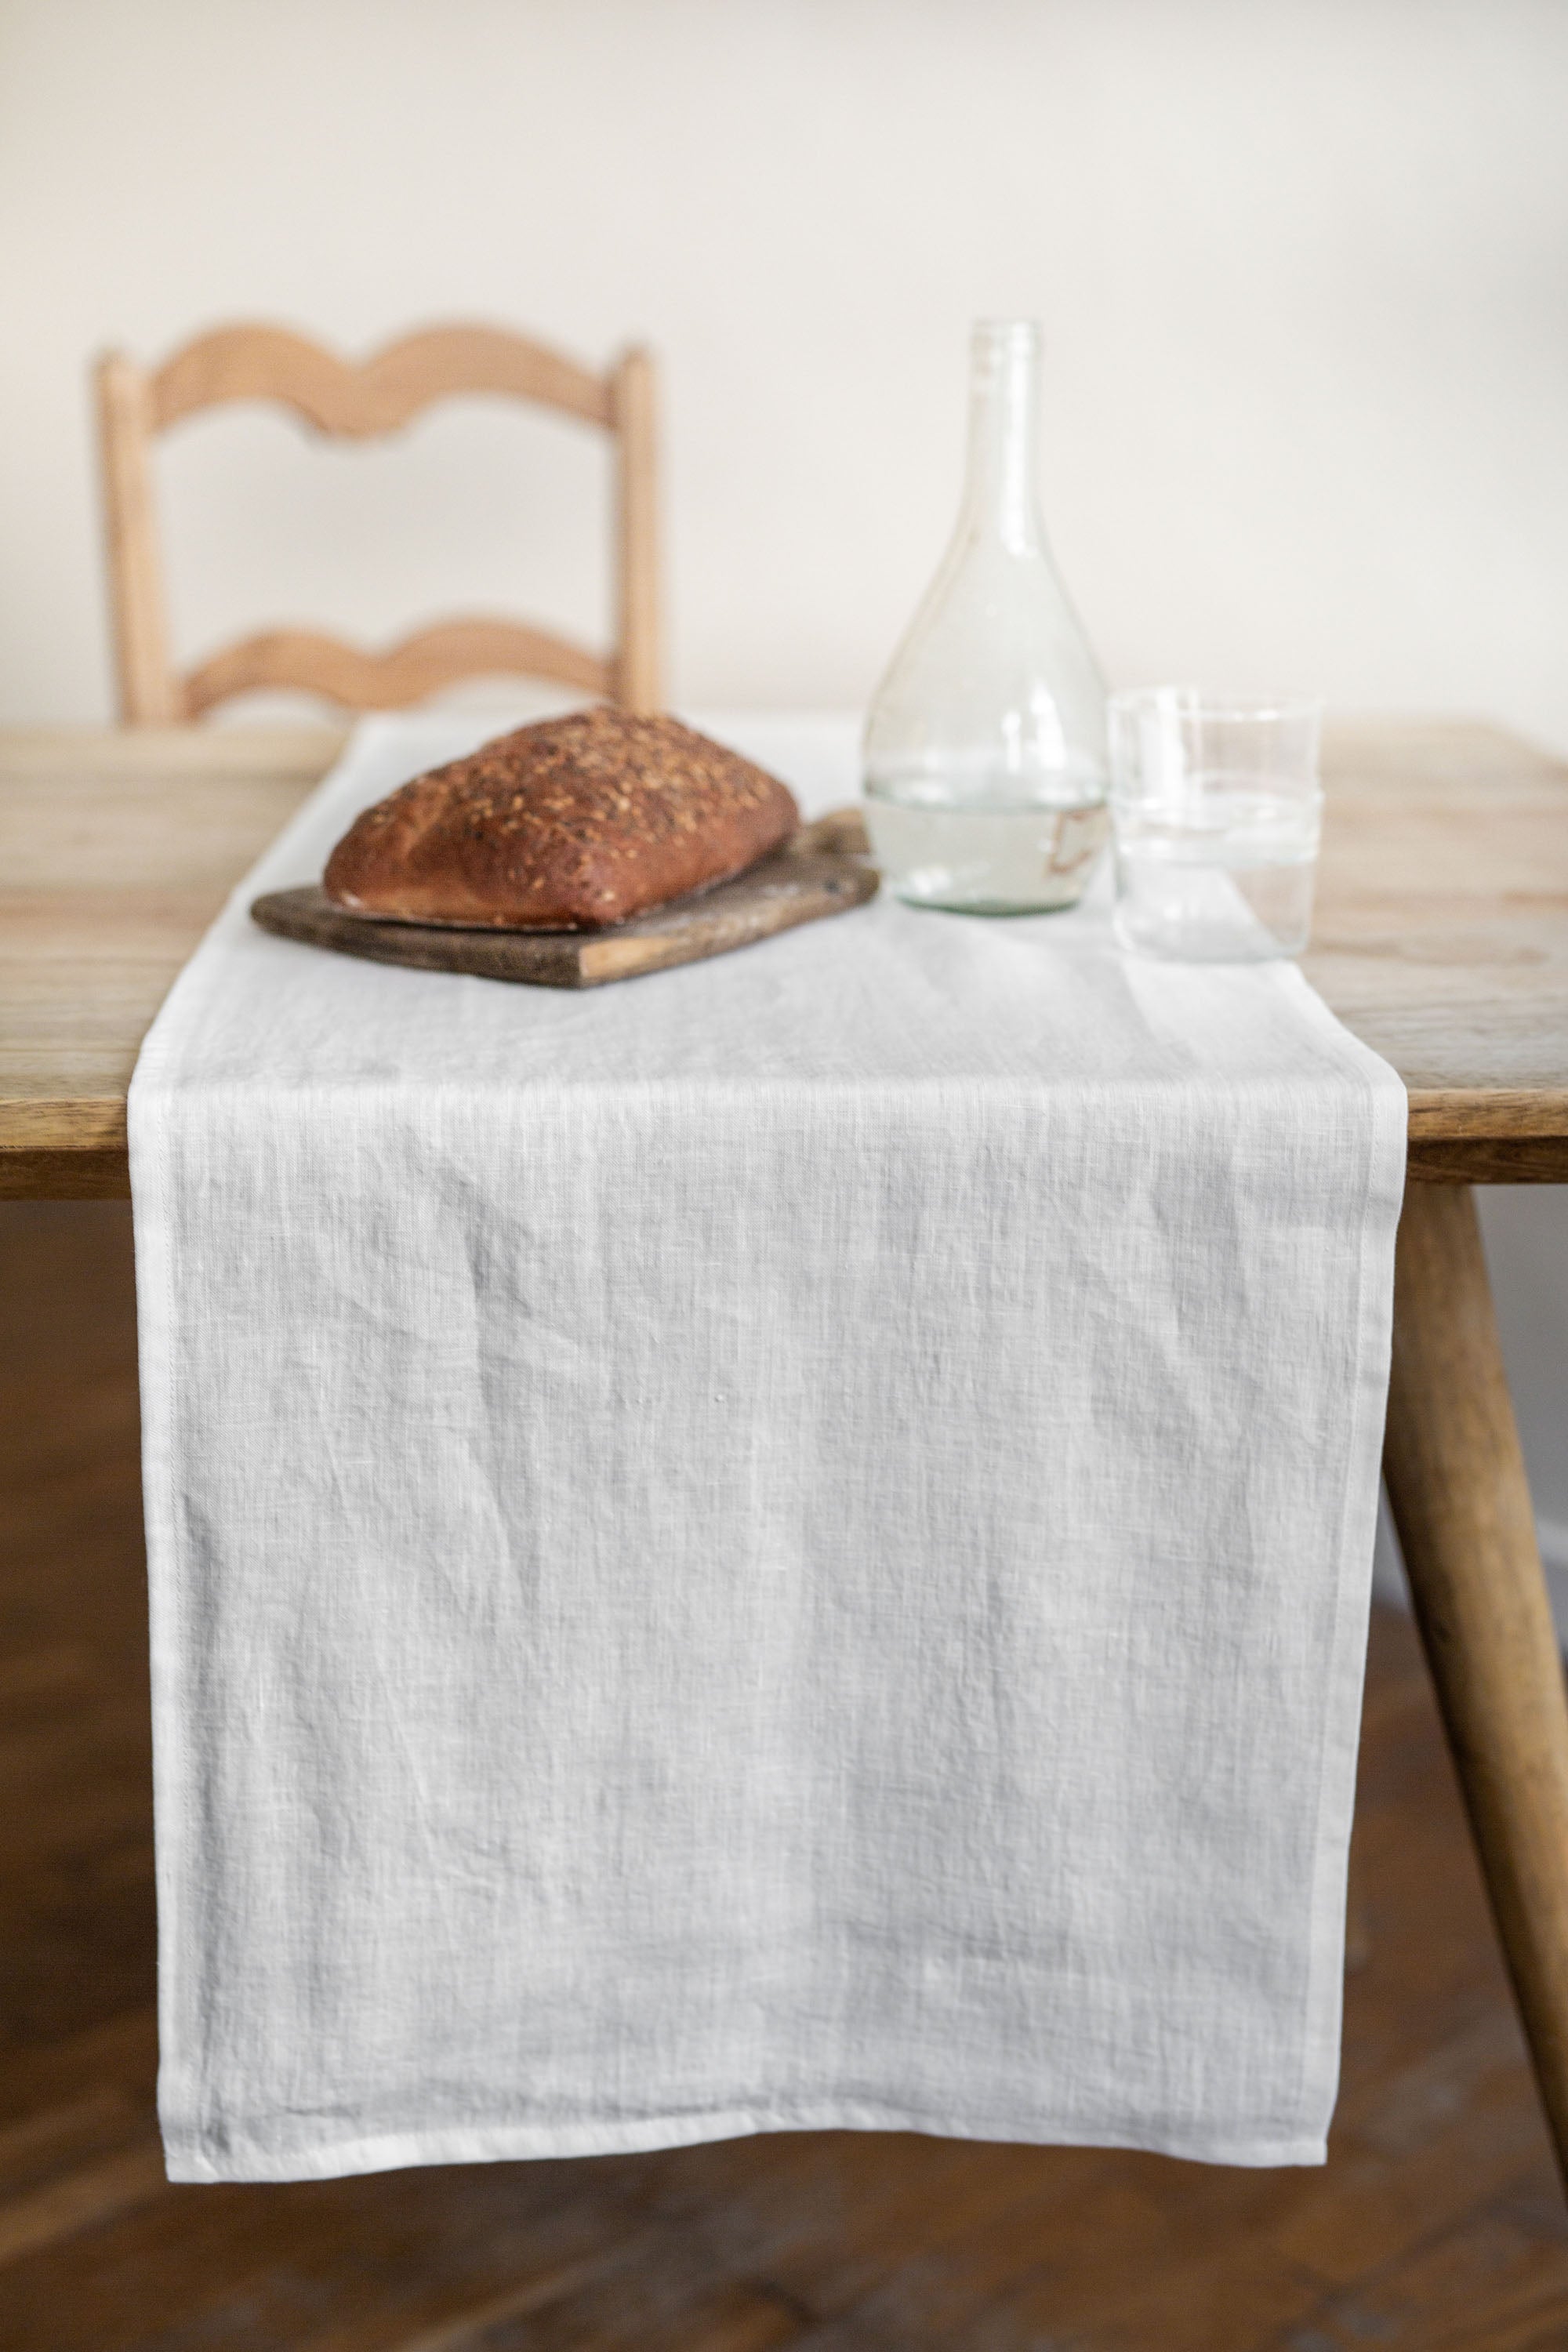 Rustic Dinner Table With Cream Linen Table Runner By AmourlInen